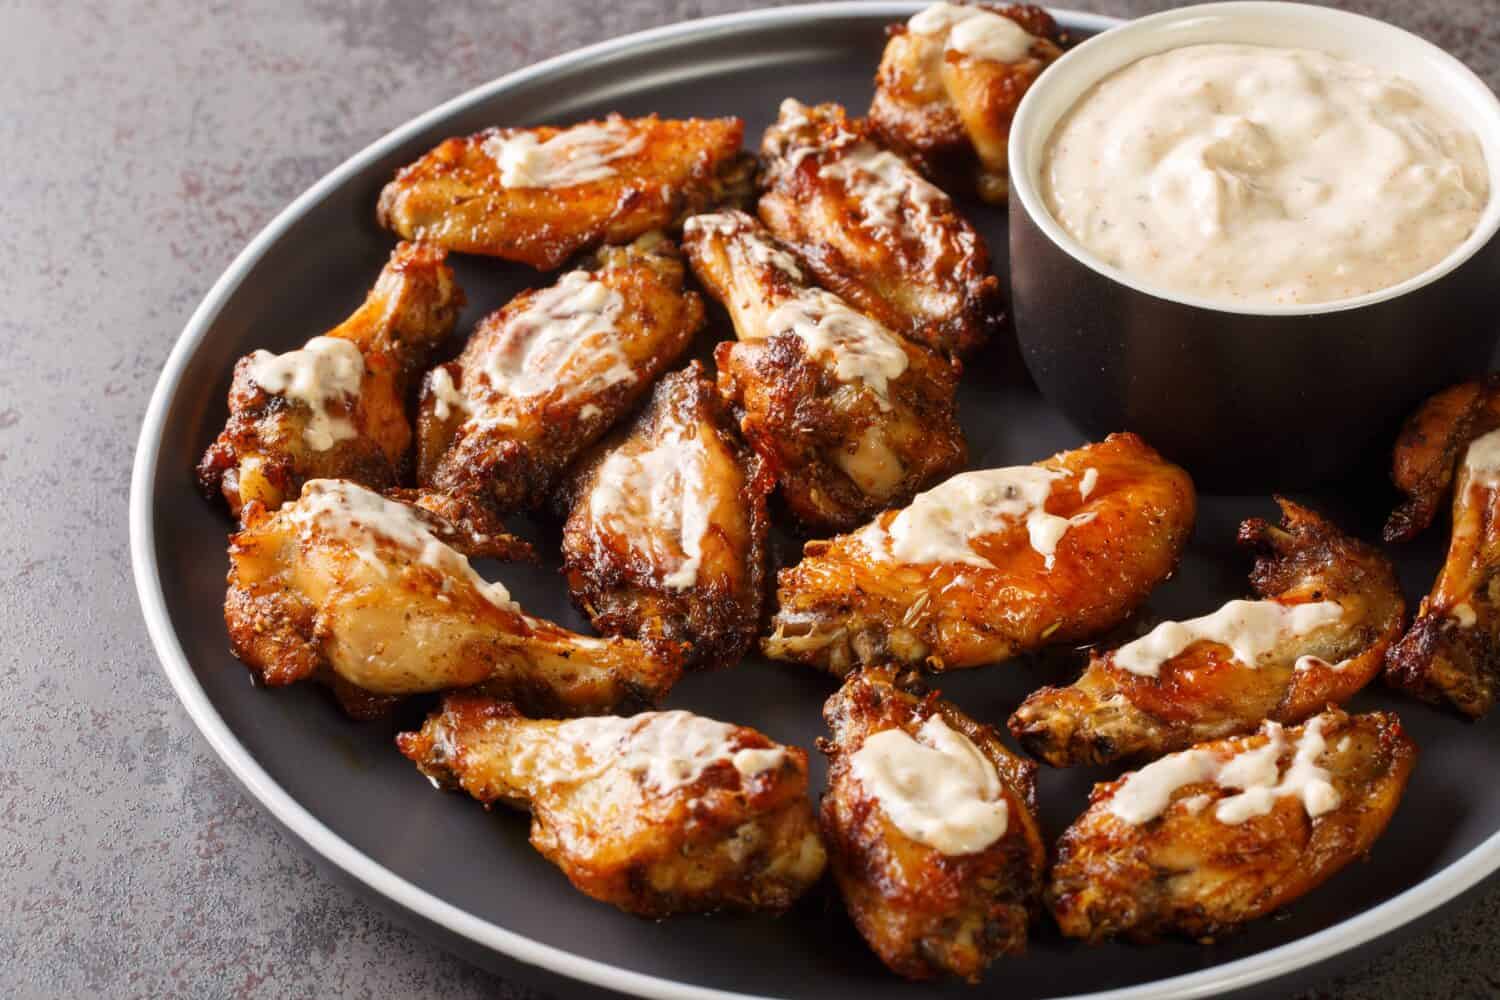 A plate of hot wings with some white sauce on the side. 